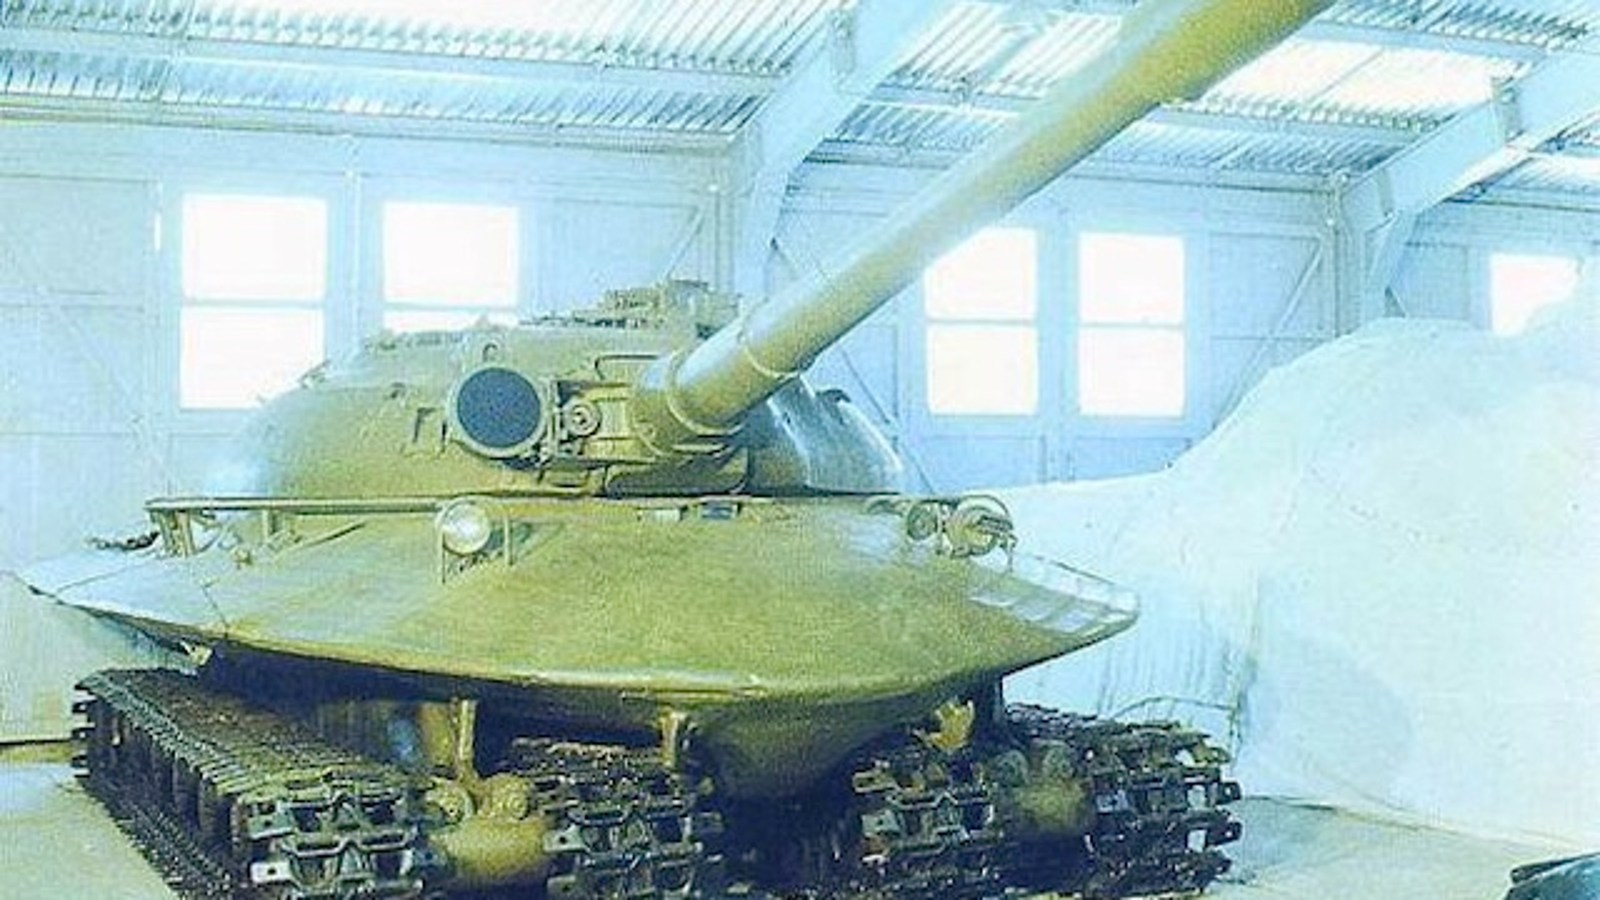 What battle saw the first use of tanks? What battle saw the first use of tanks?